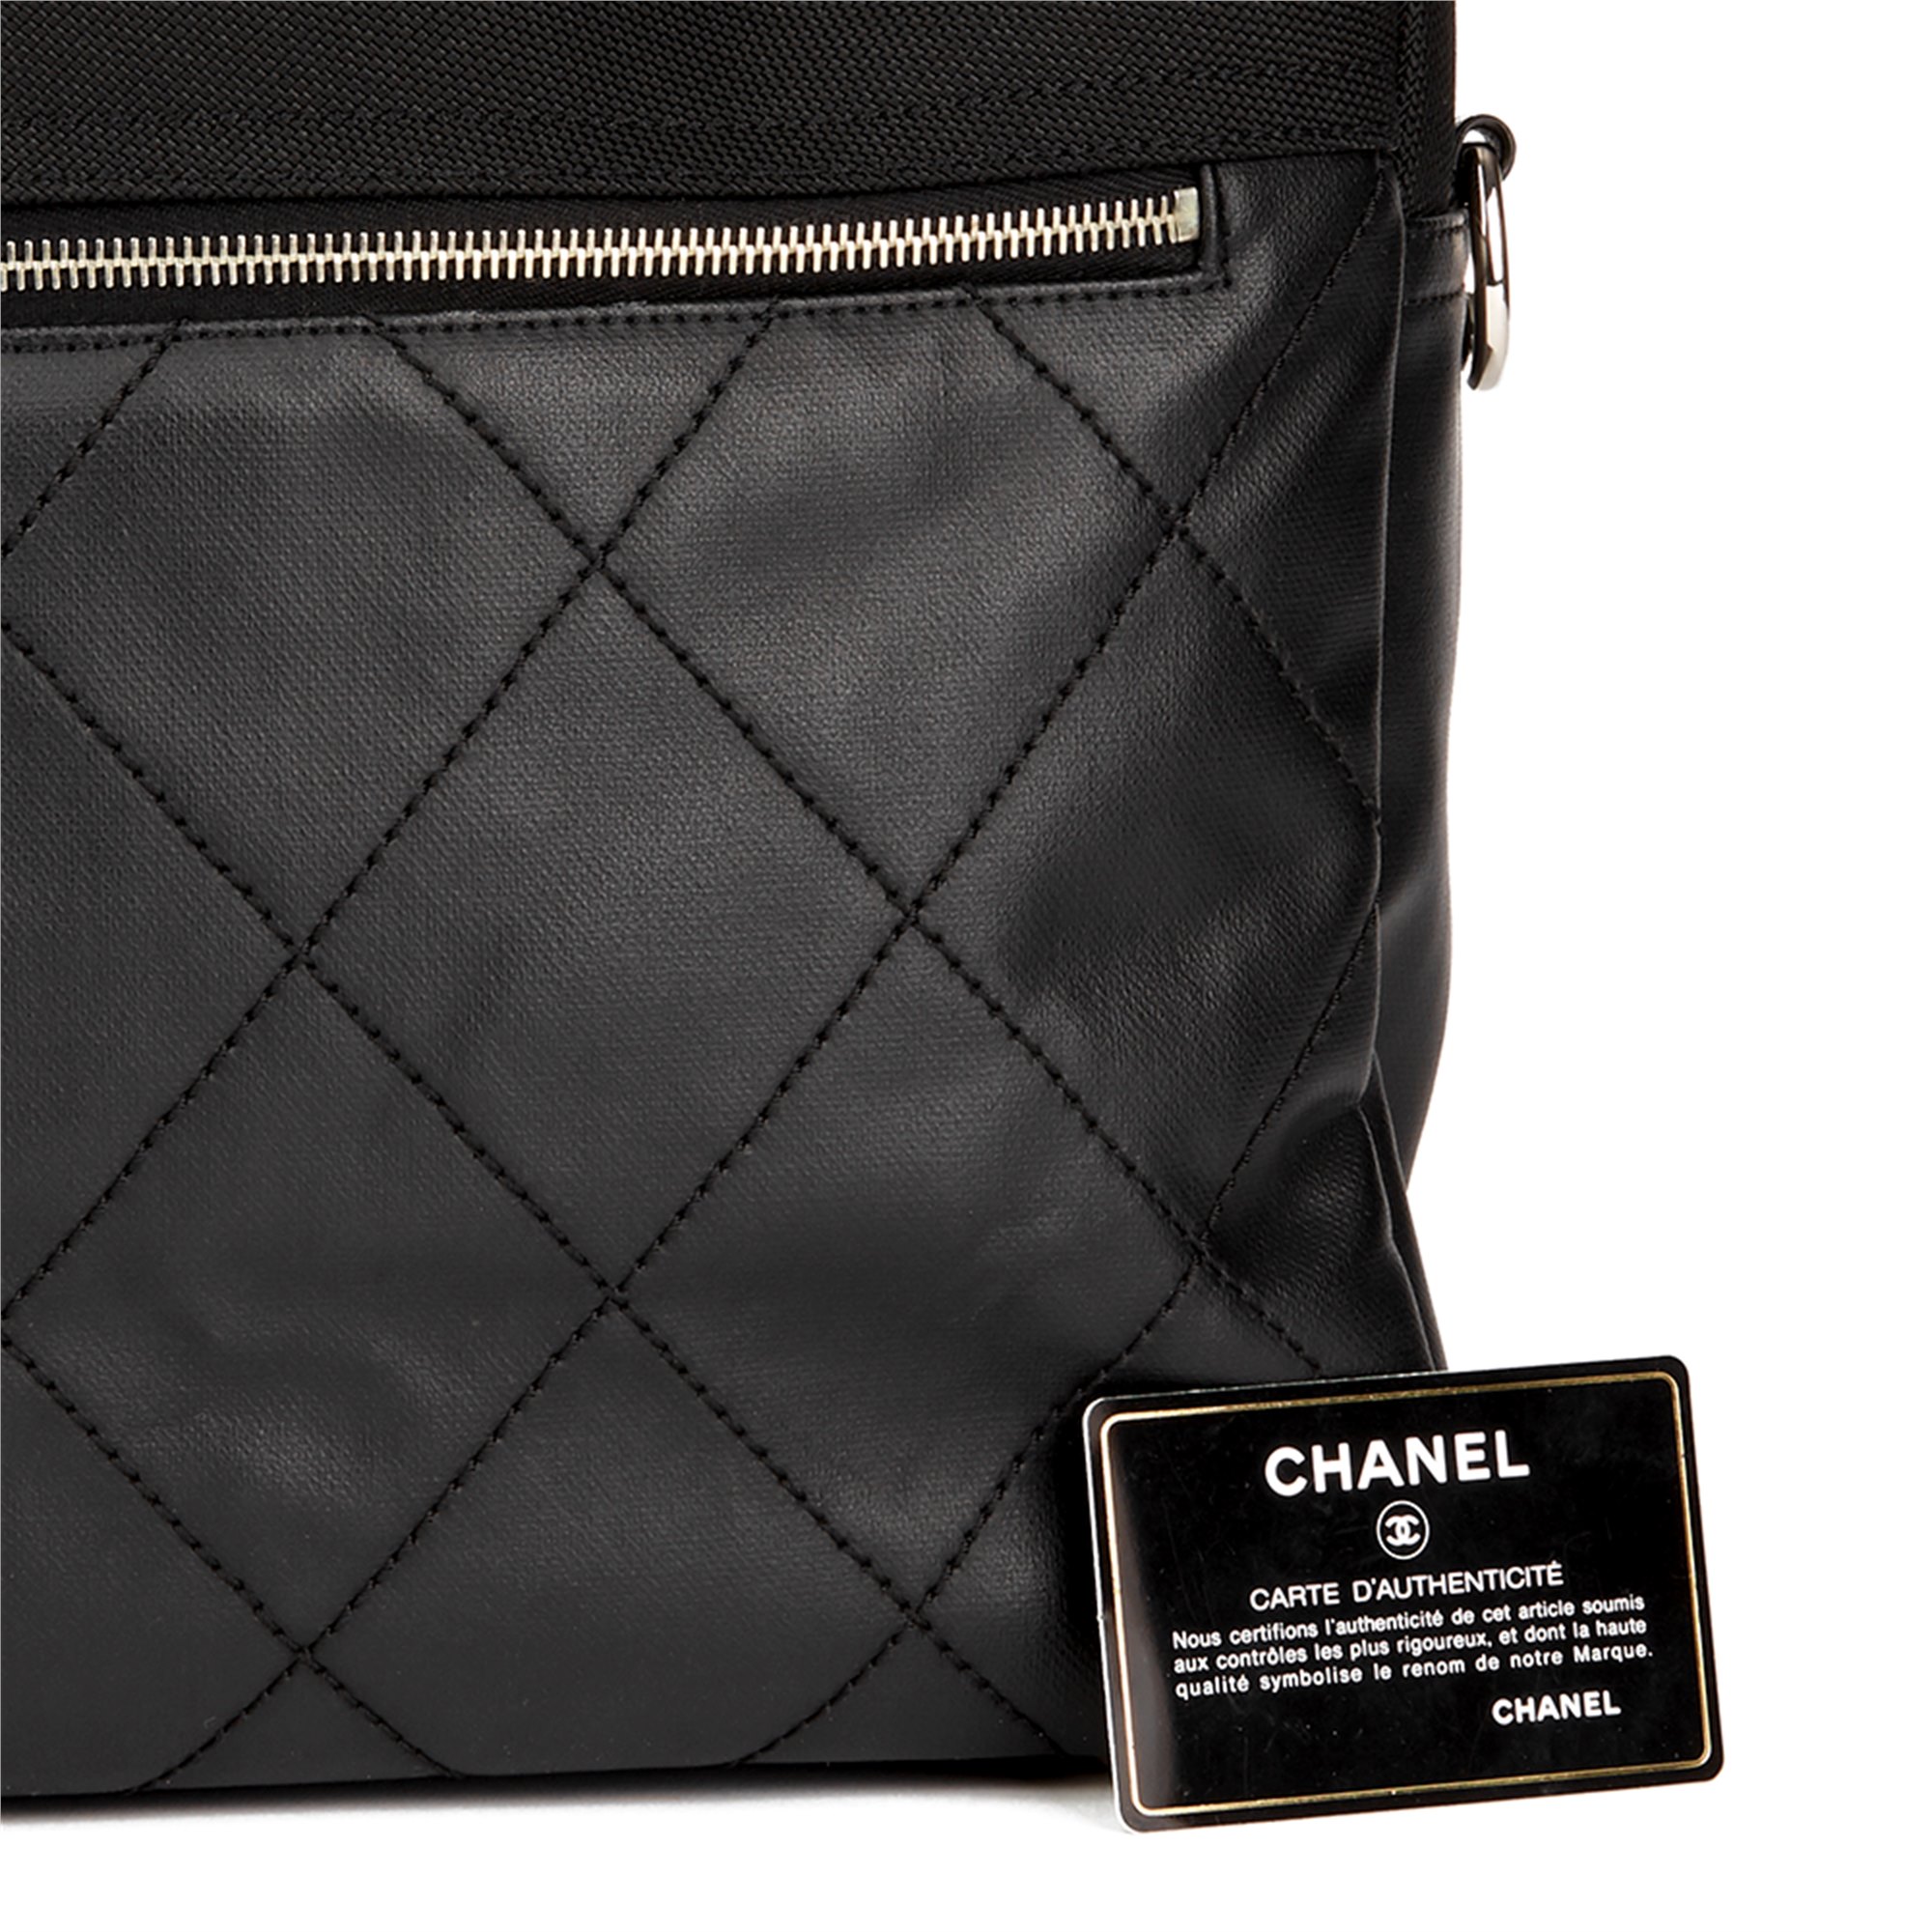 Chanel Convertible Backpack 2008 HB1745 | Second Hand Handbags